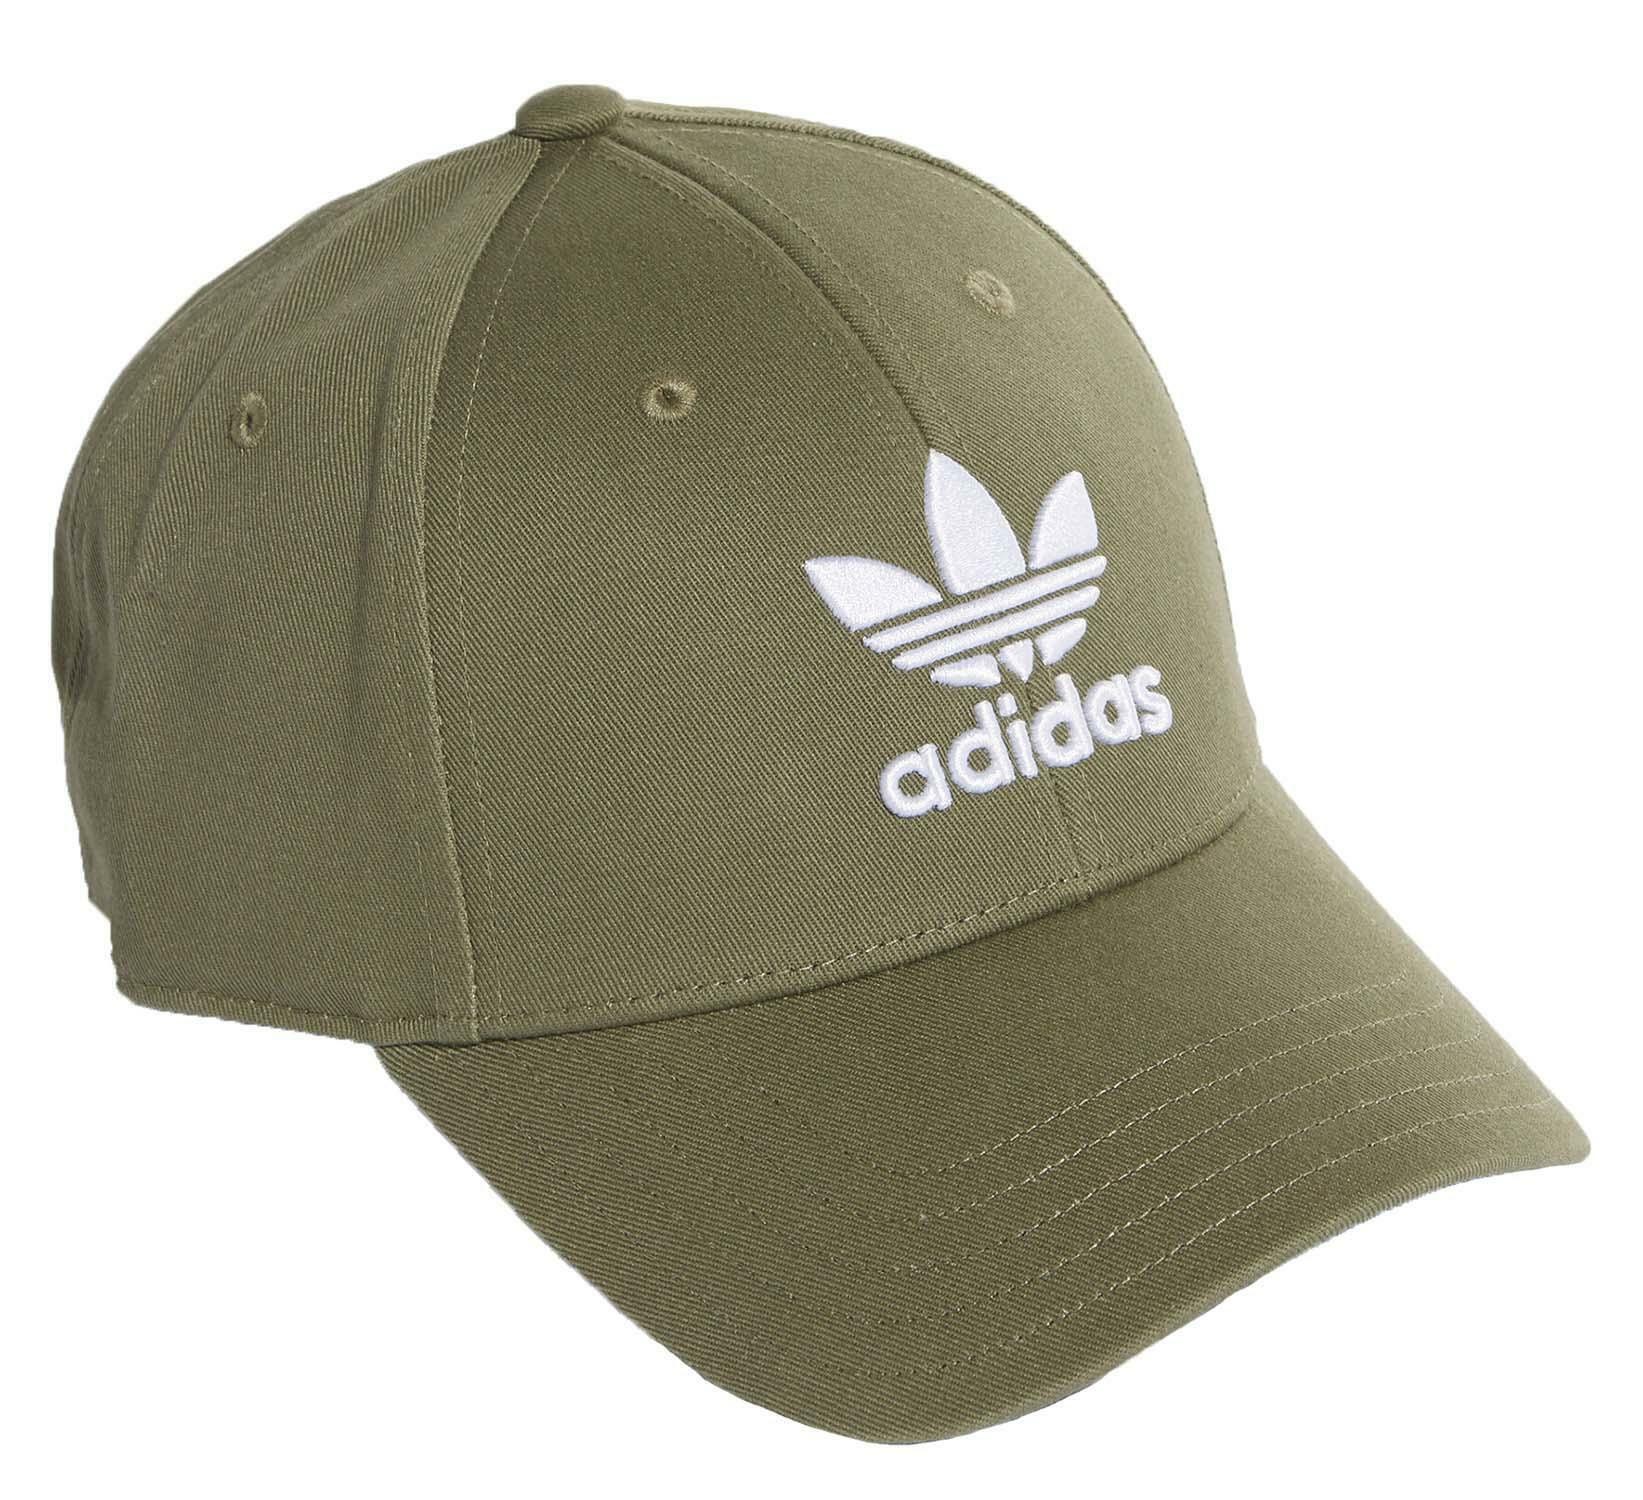 verde adidas cappello coupon for 233c6 1d600